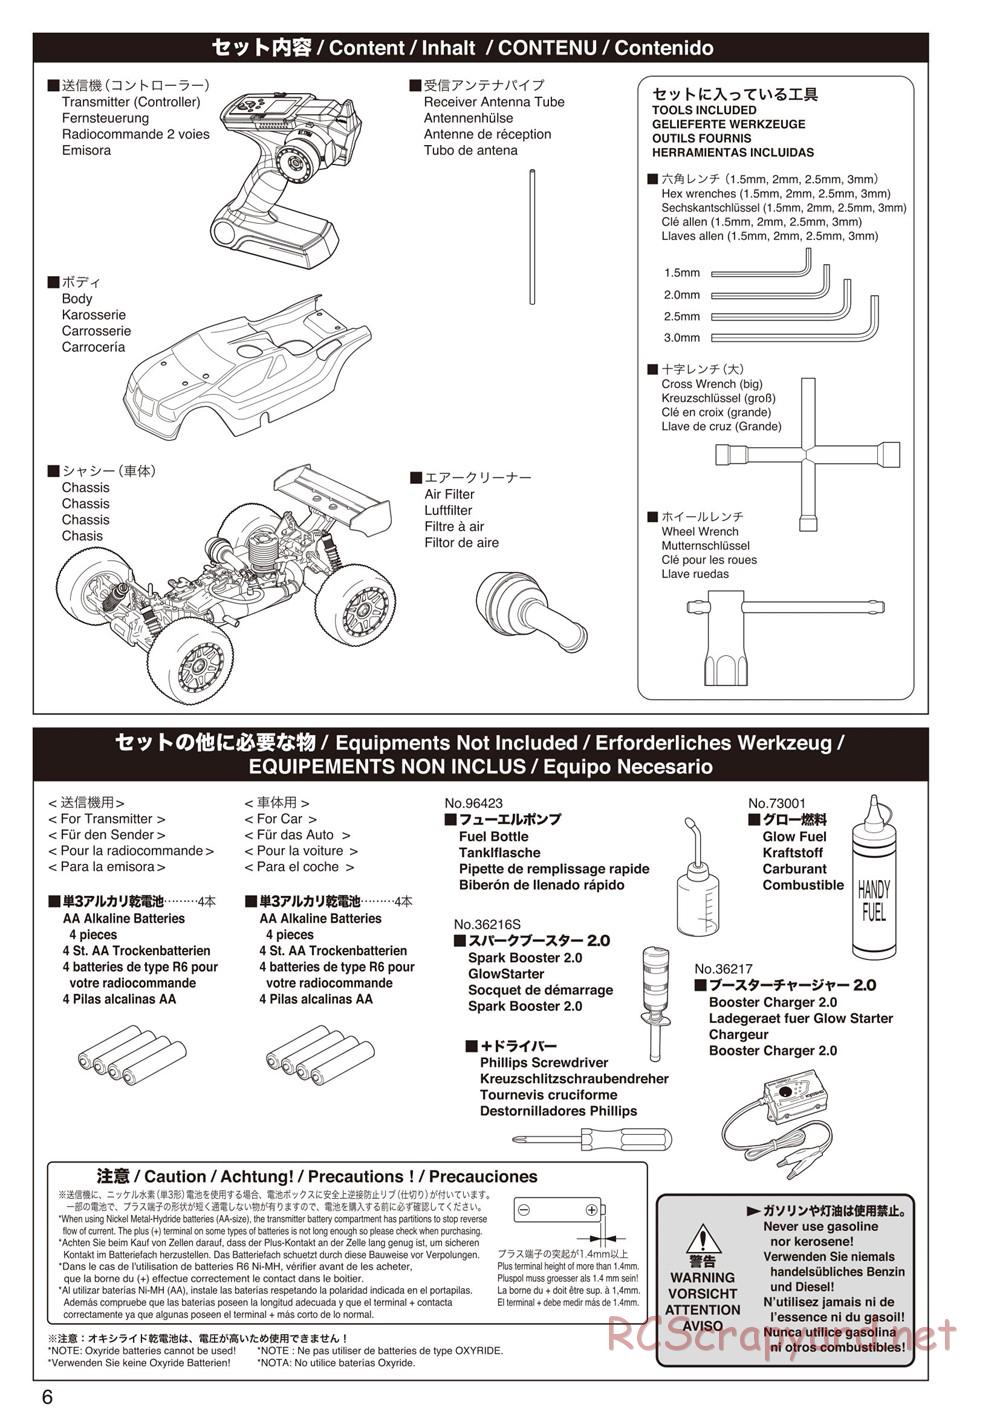 Kyosho - Inferno Neo ST - Manual - Page 6